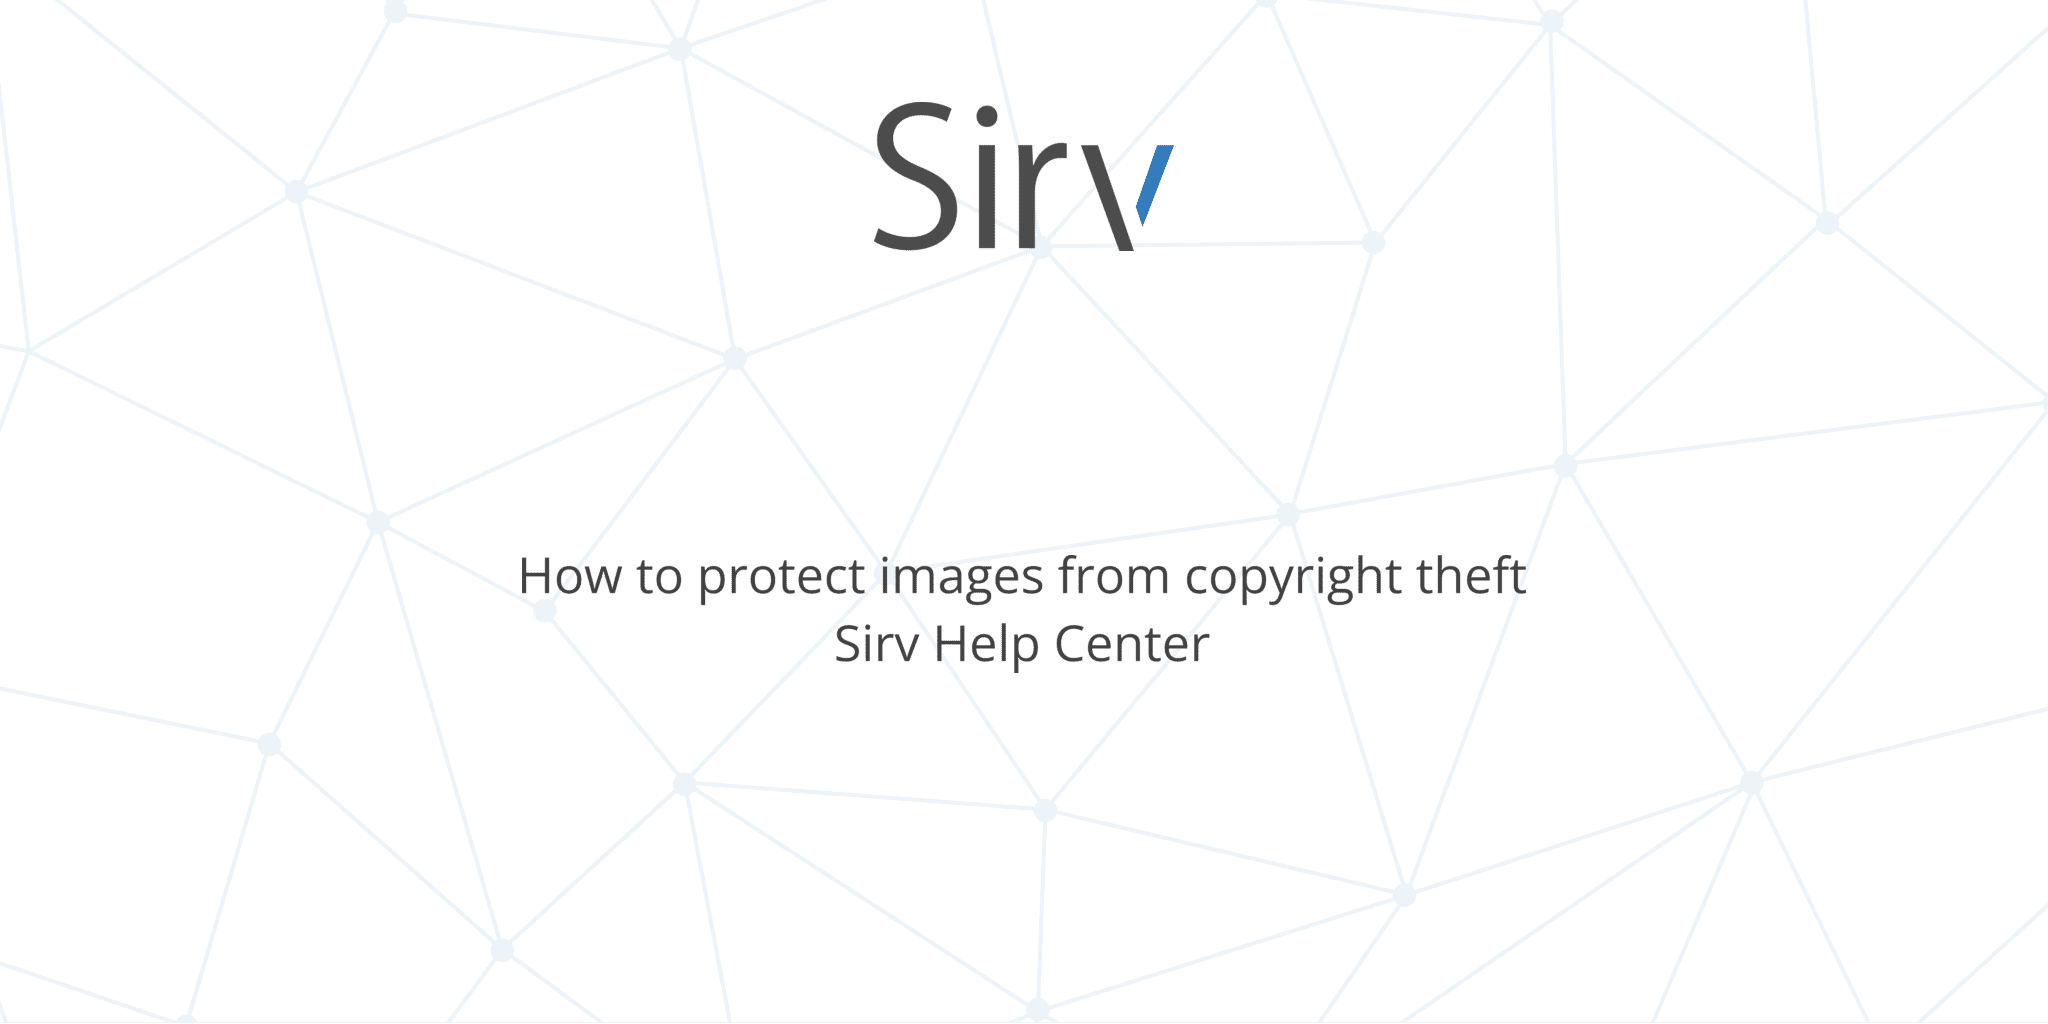 How To Protect Images From Copyright Theft Sirv Help Center